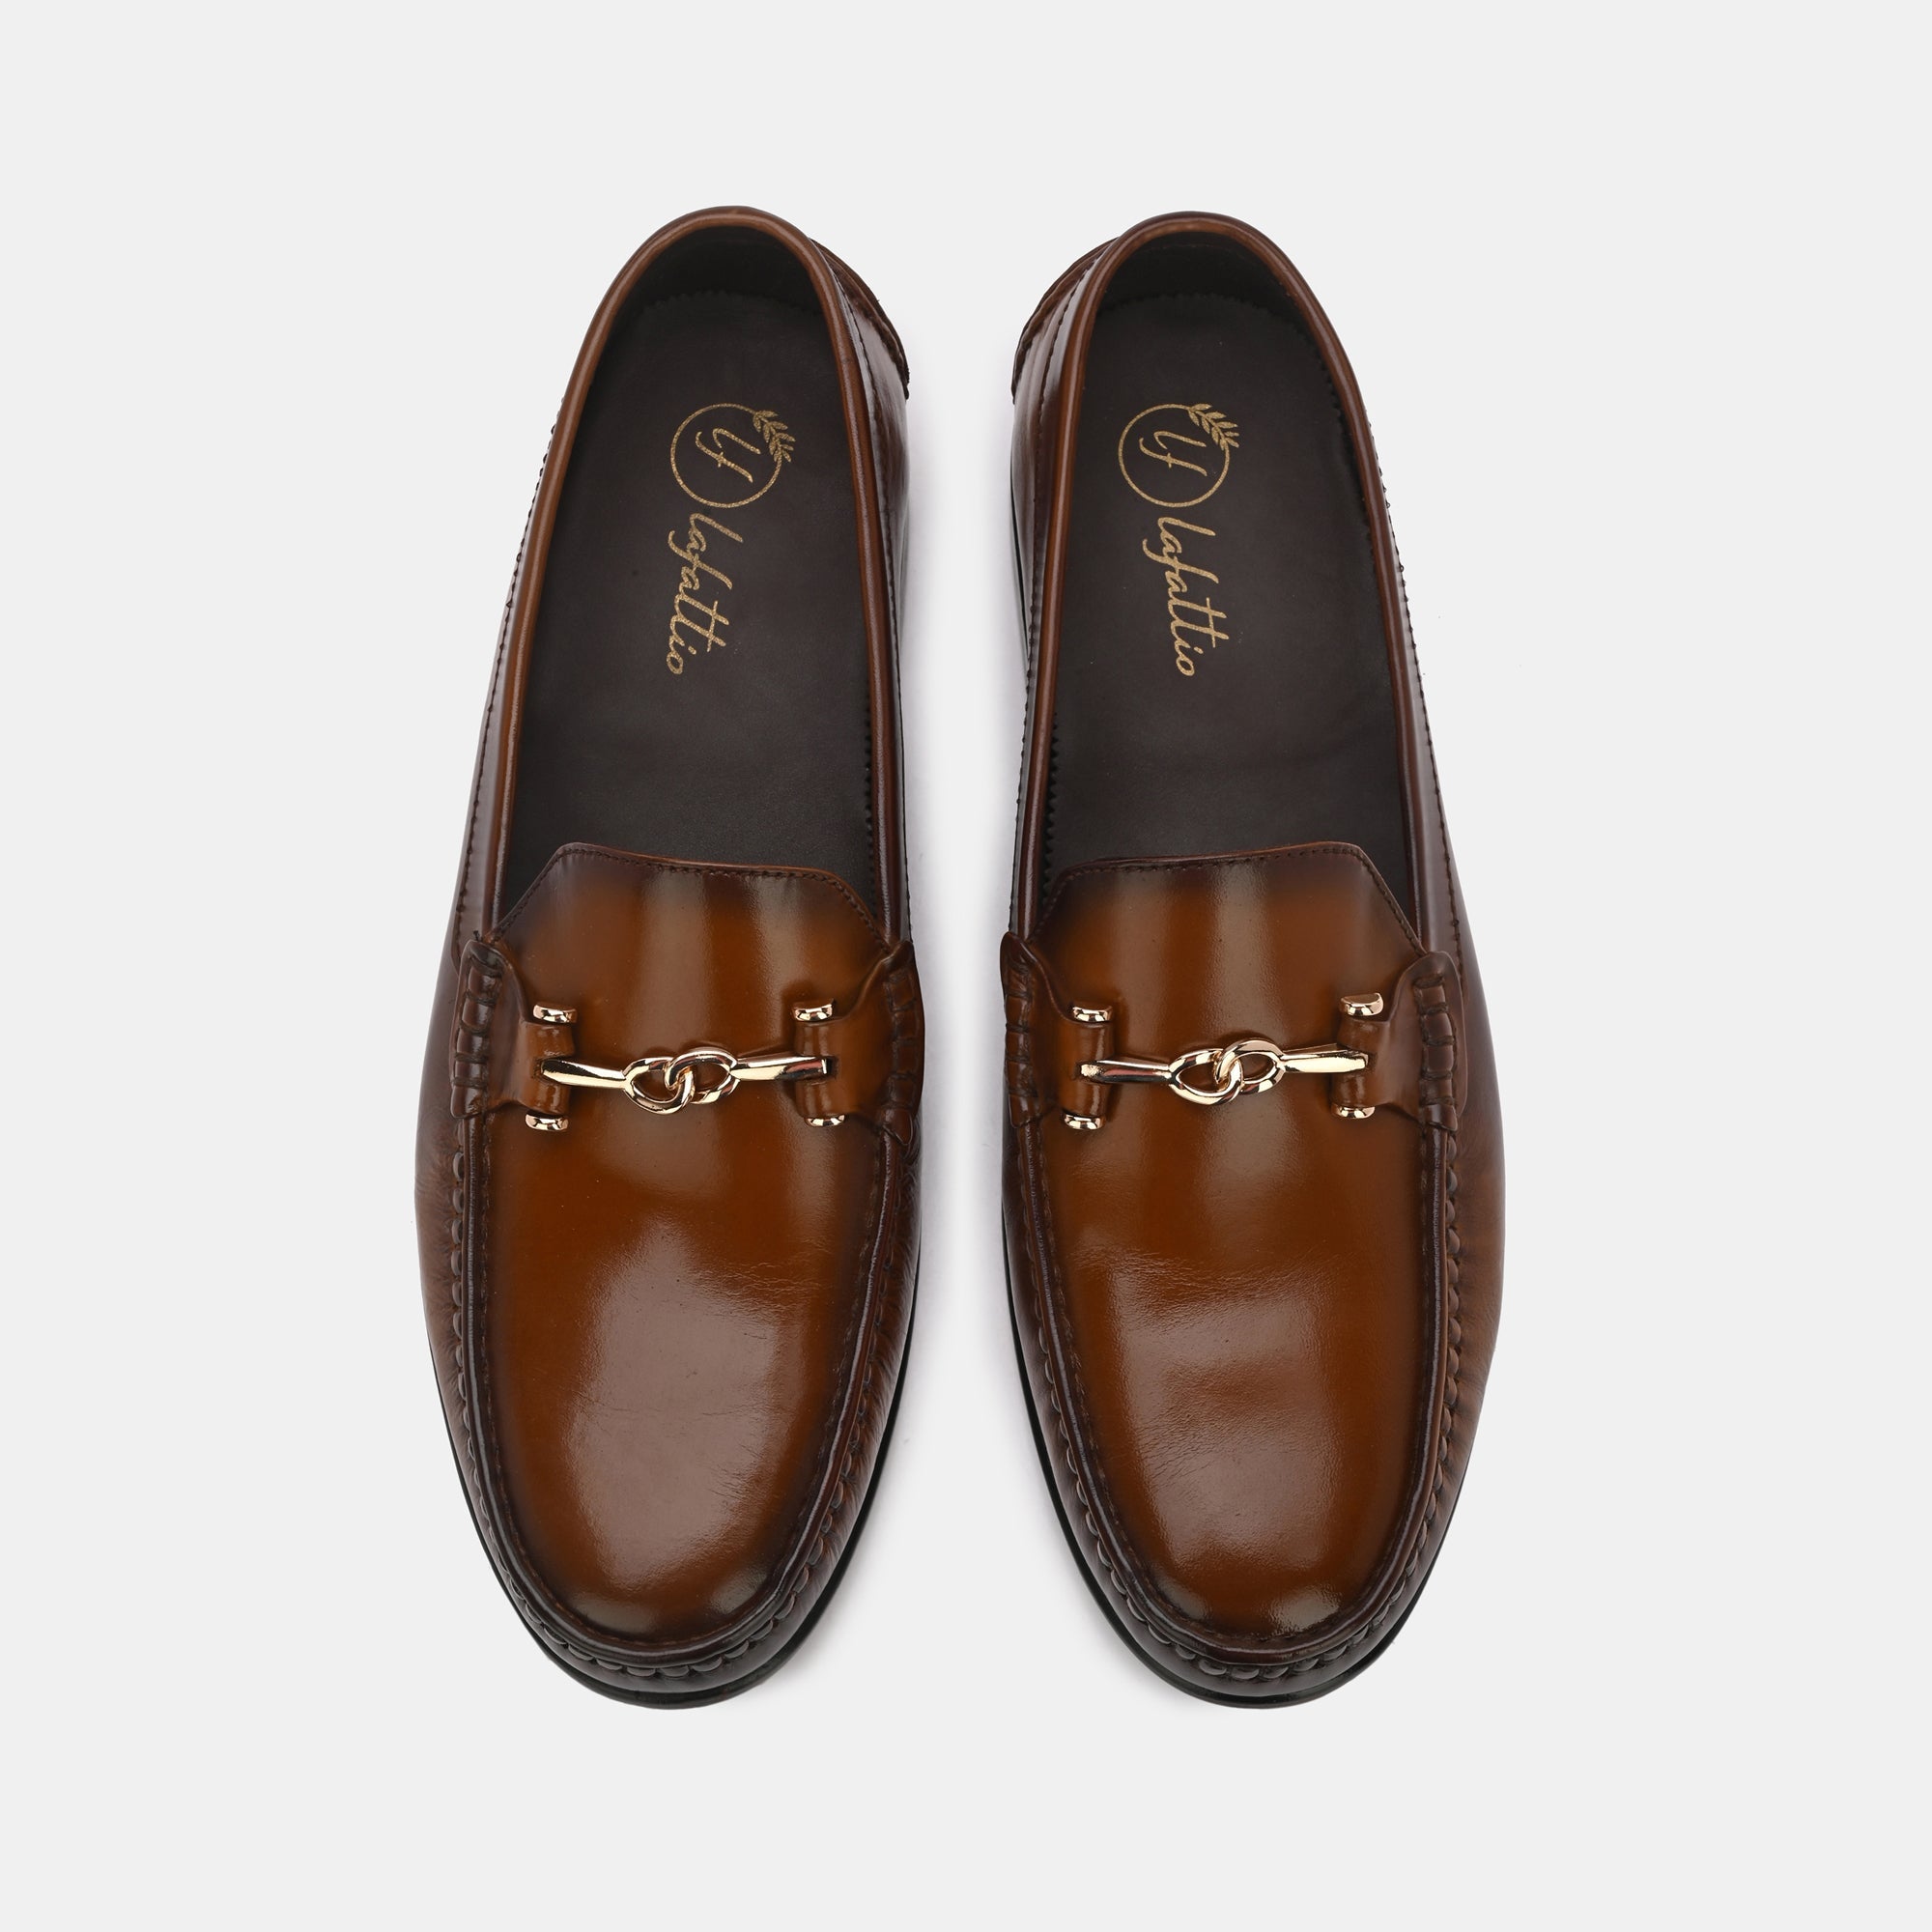 Tan Buckled Loafers by Lafattio